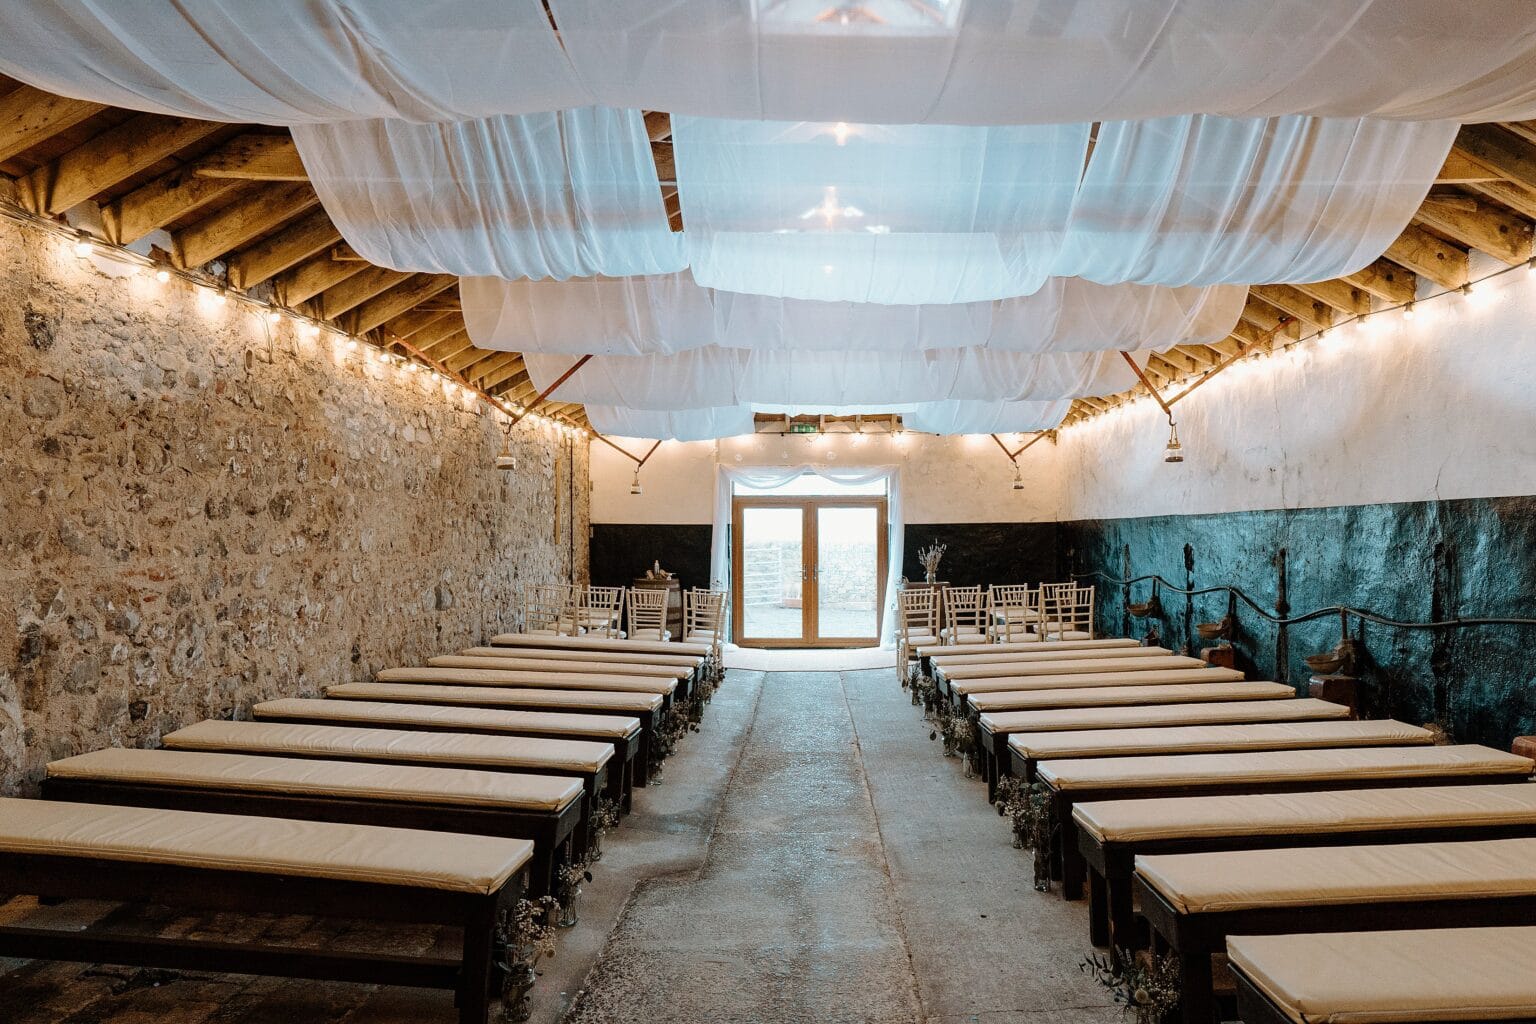 interior inside view of a barn wedding venue in scotland set up for a wedding ceremony with bench seating and white drapes hanging from the ceiling